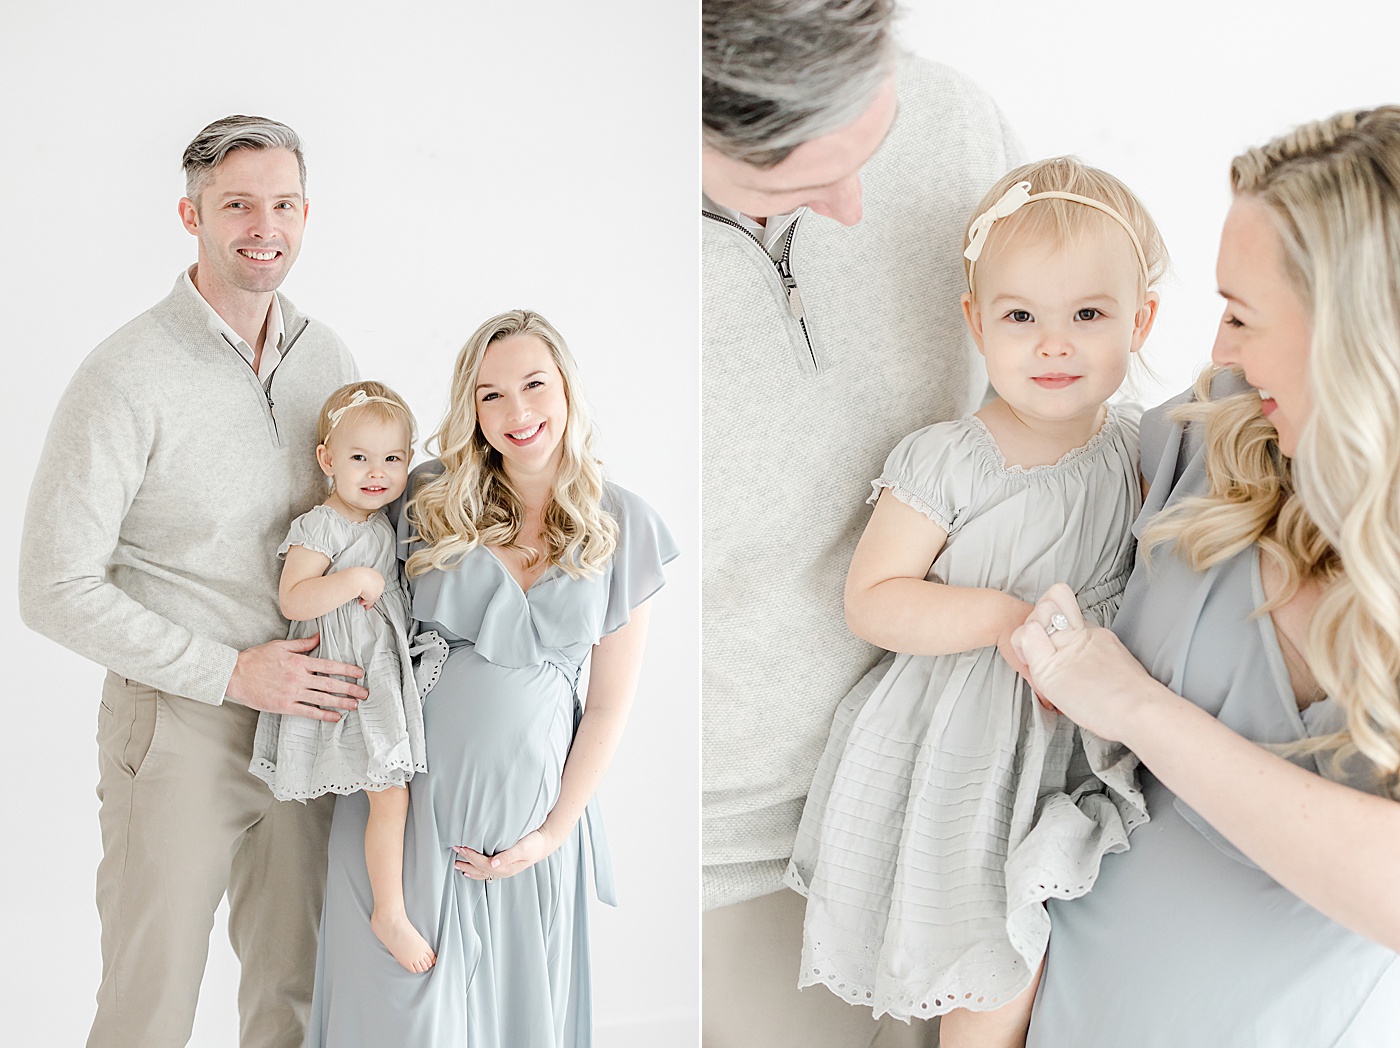 5 Reasons Why You Should Take Maternity Photos | Mom and Dad holding toddler for maternity photos with Kristin Wood Photography.